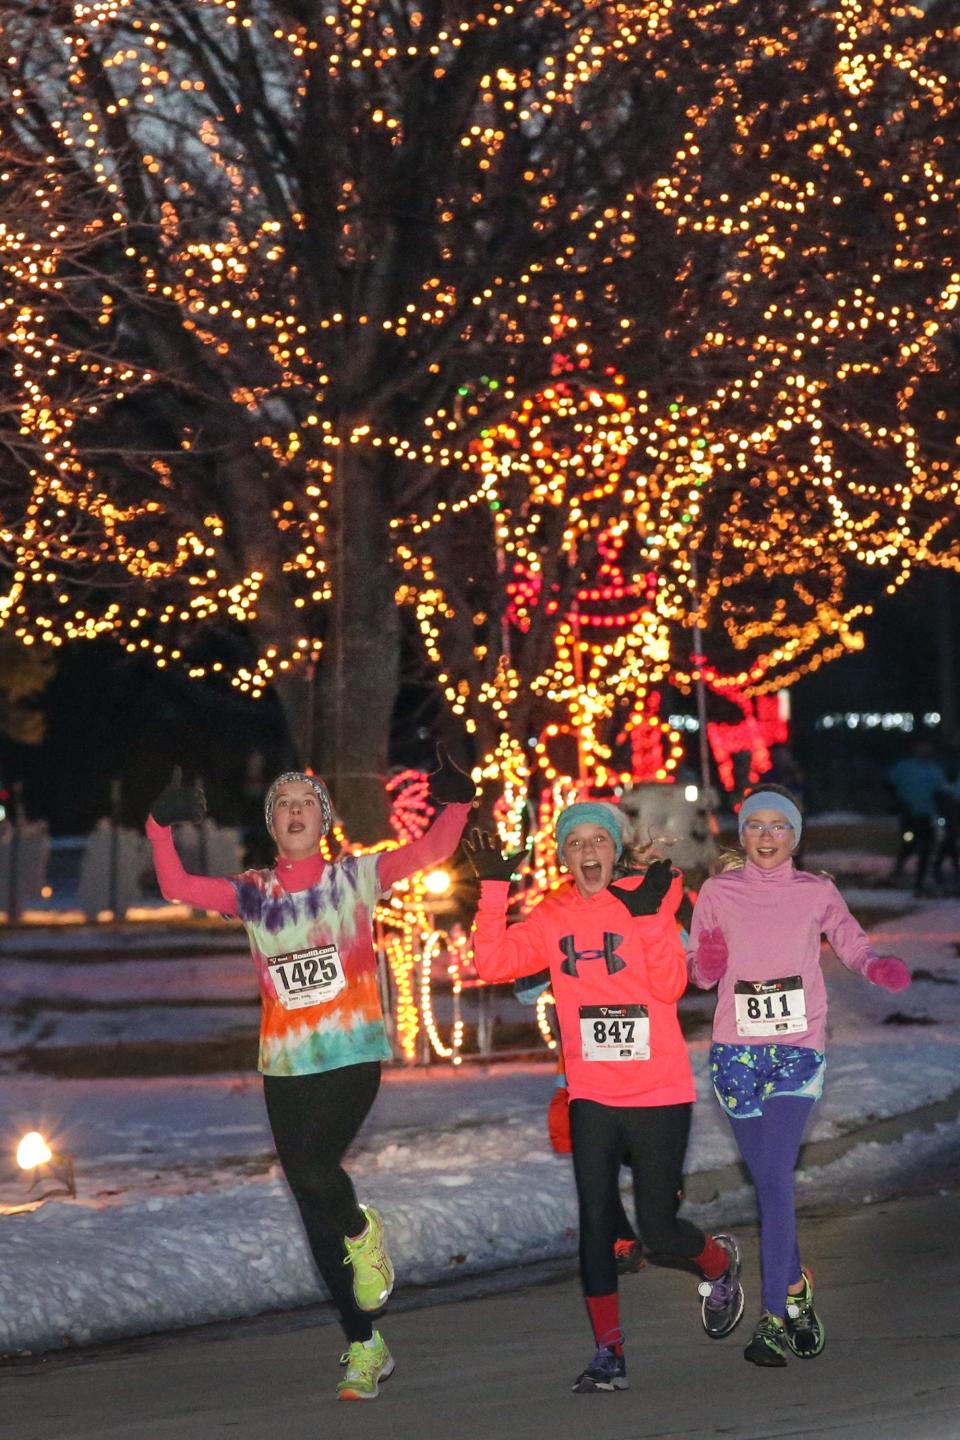 Local runners had a clear night to participate in the Christine Ann Center Race for the Light. The course took the runners through Menomonie Park and the Celebration of Lights. 